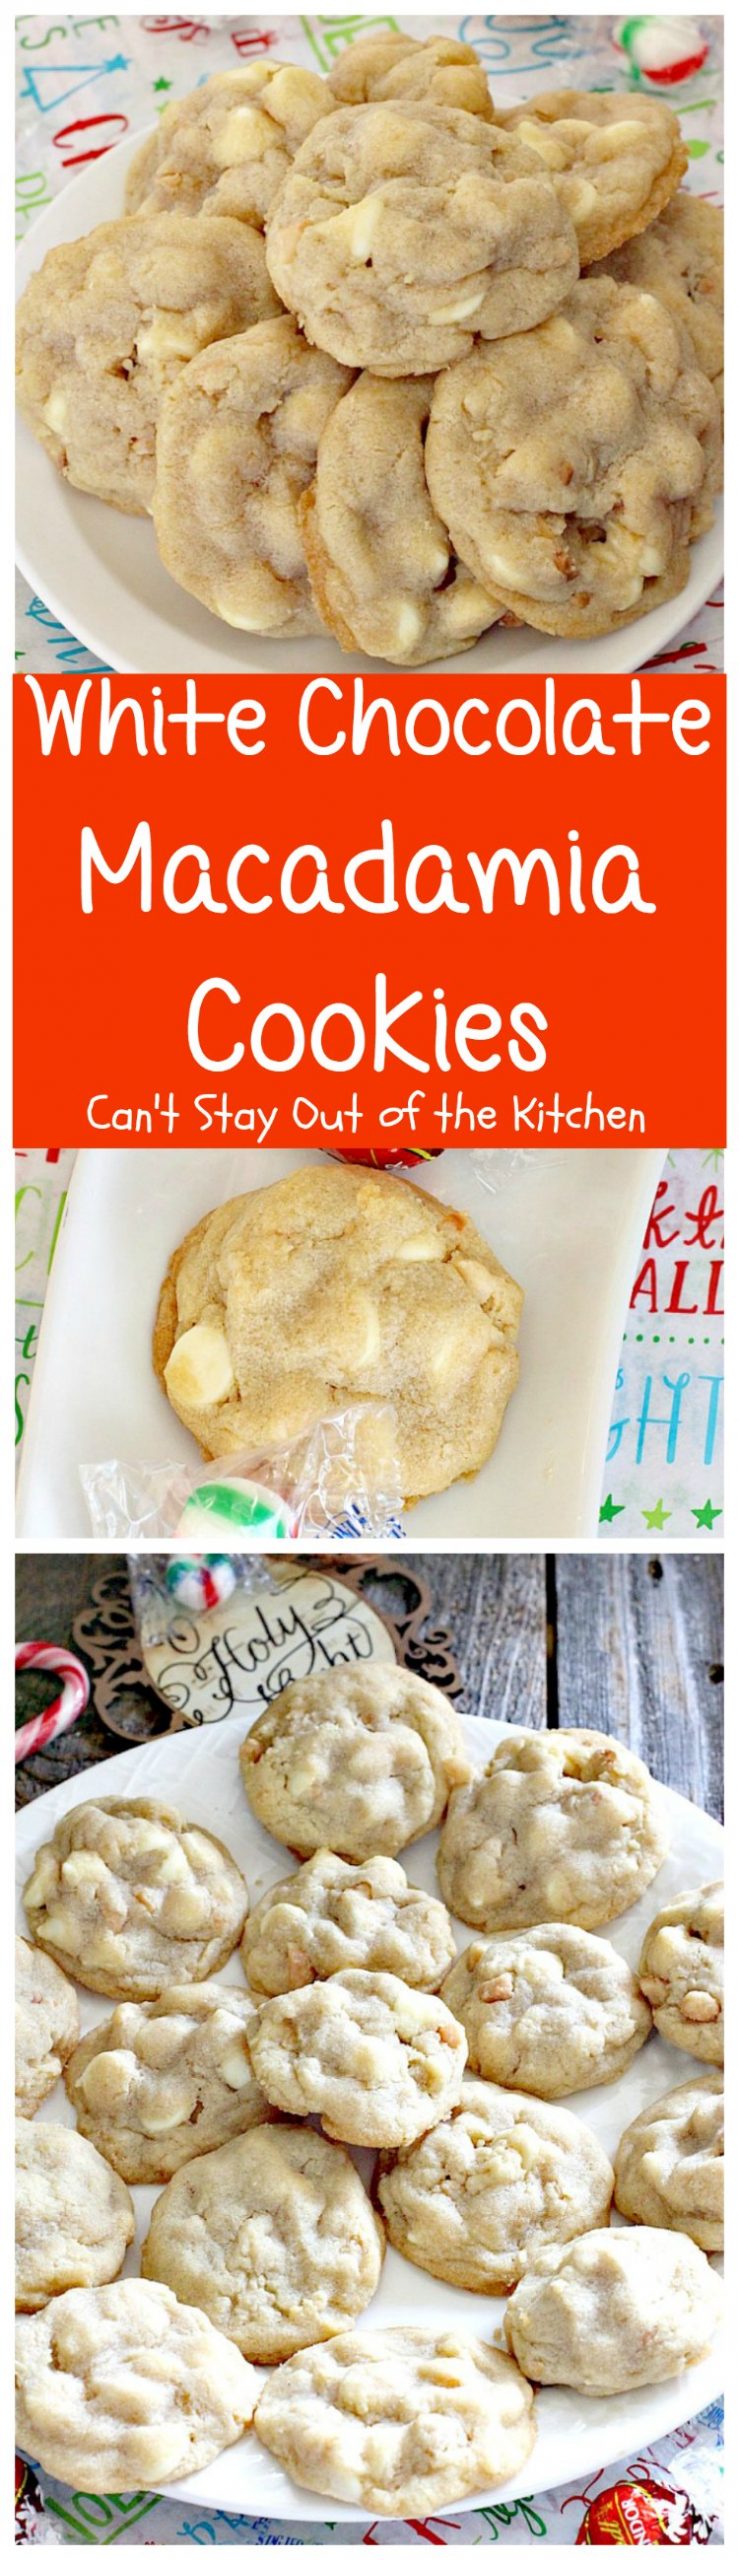 White Chocolate Macadamia Cookies | Can't Stay Out of the Kitchen